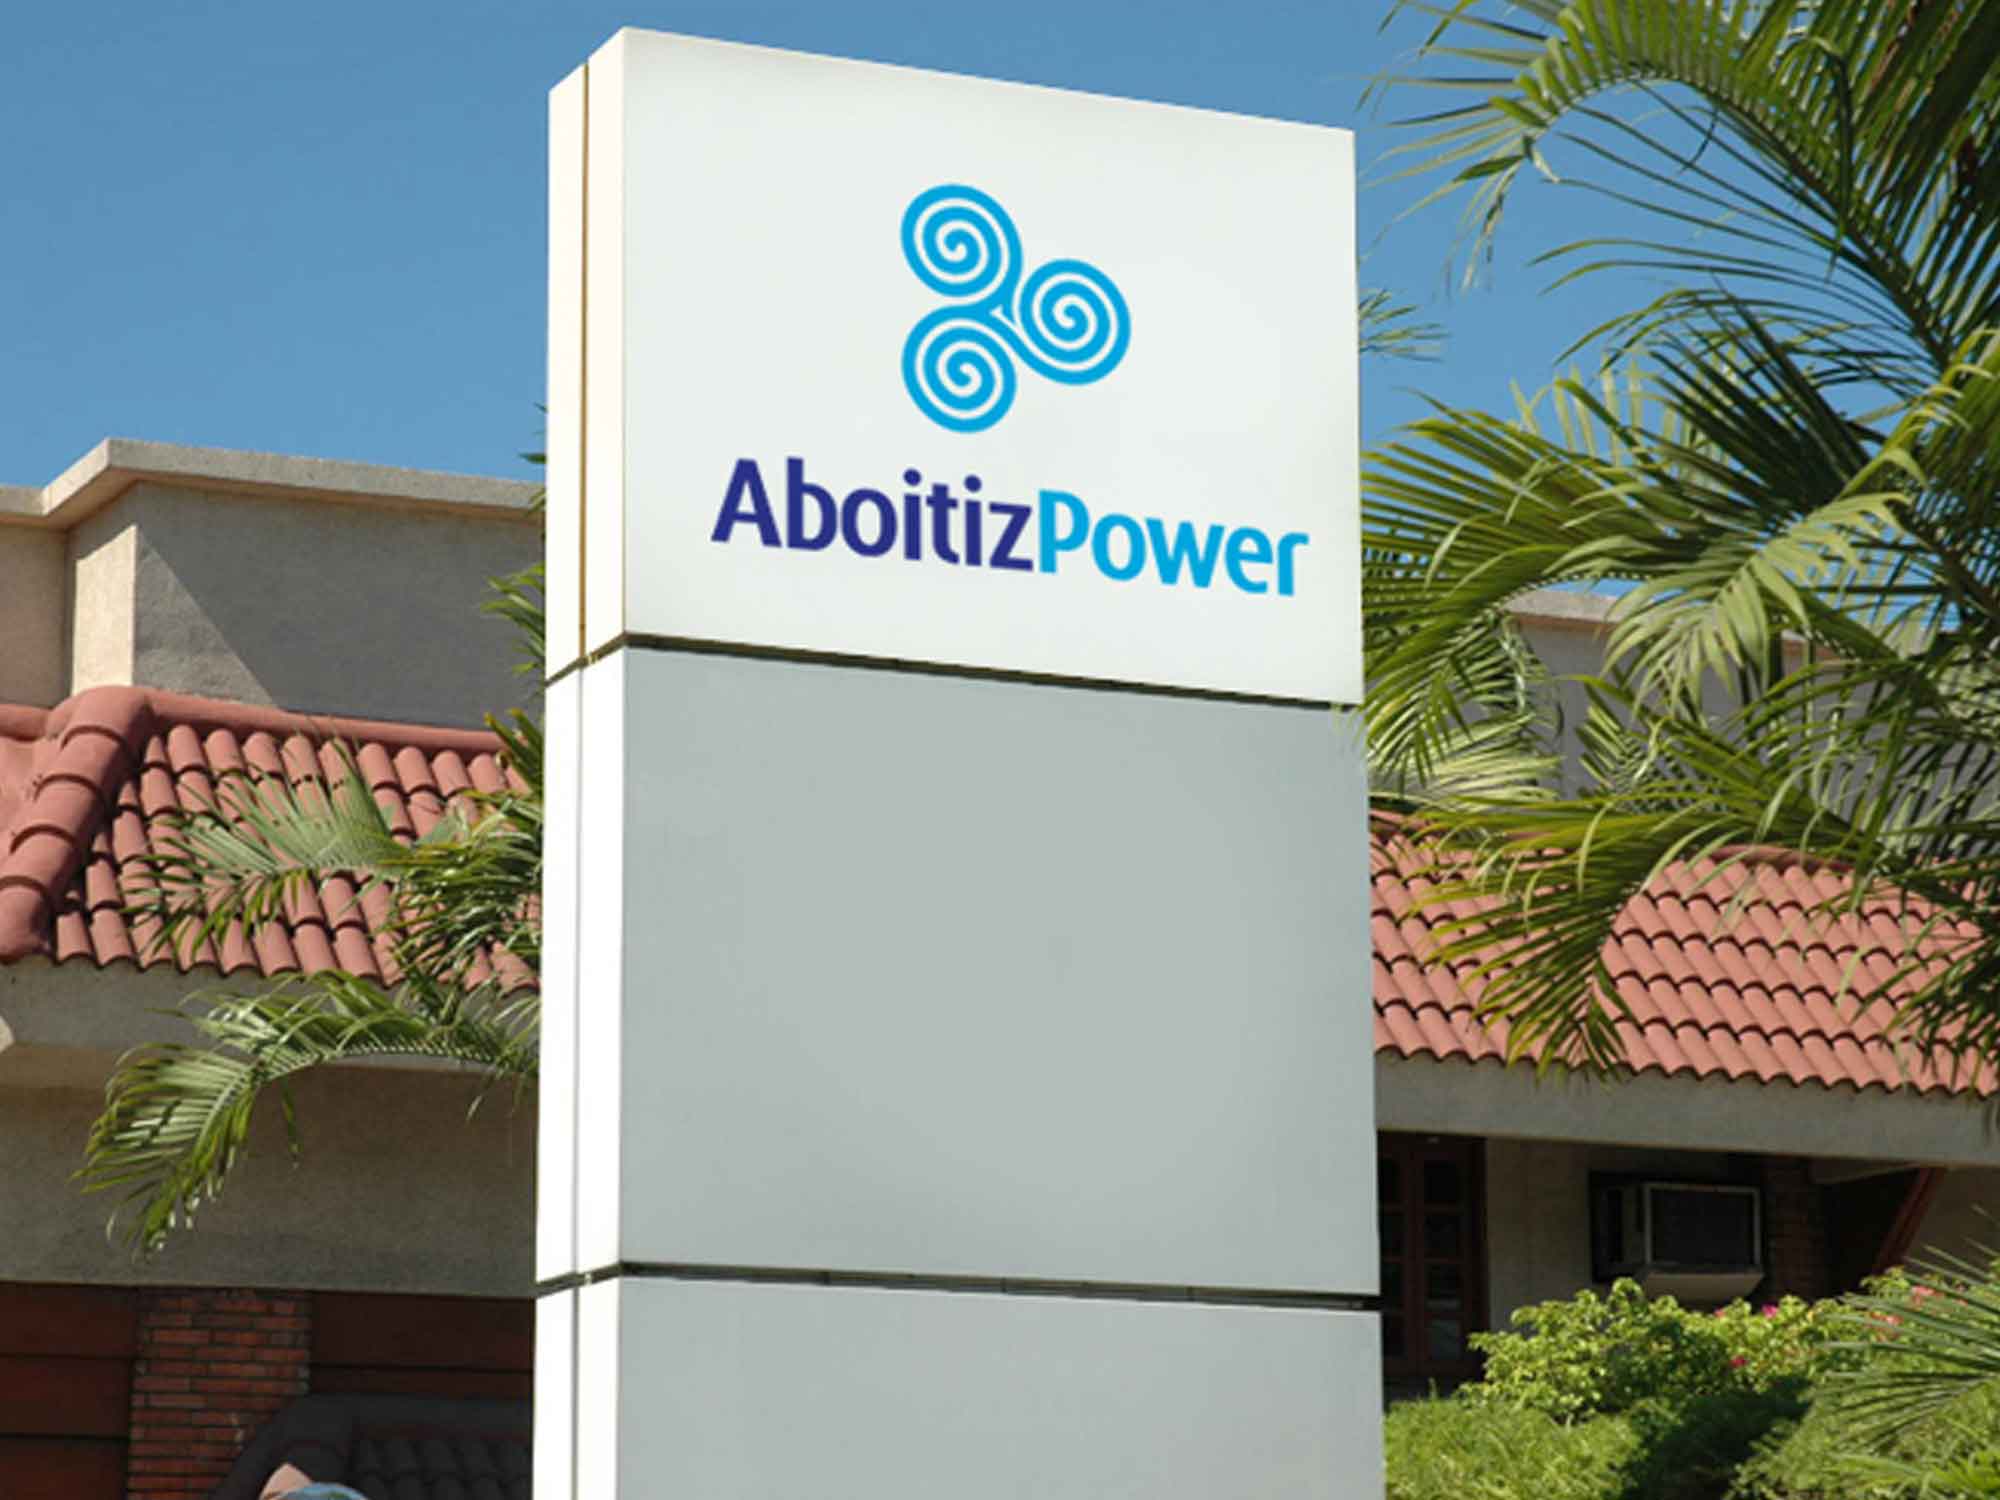 Brand Consultancy in Energy Industry. Signage for AboitizPower.